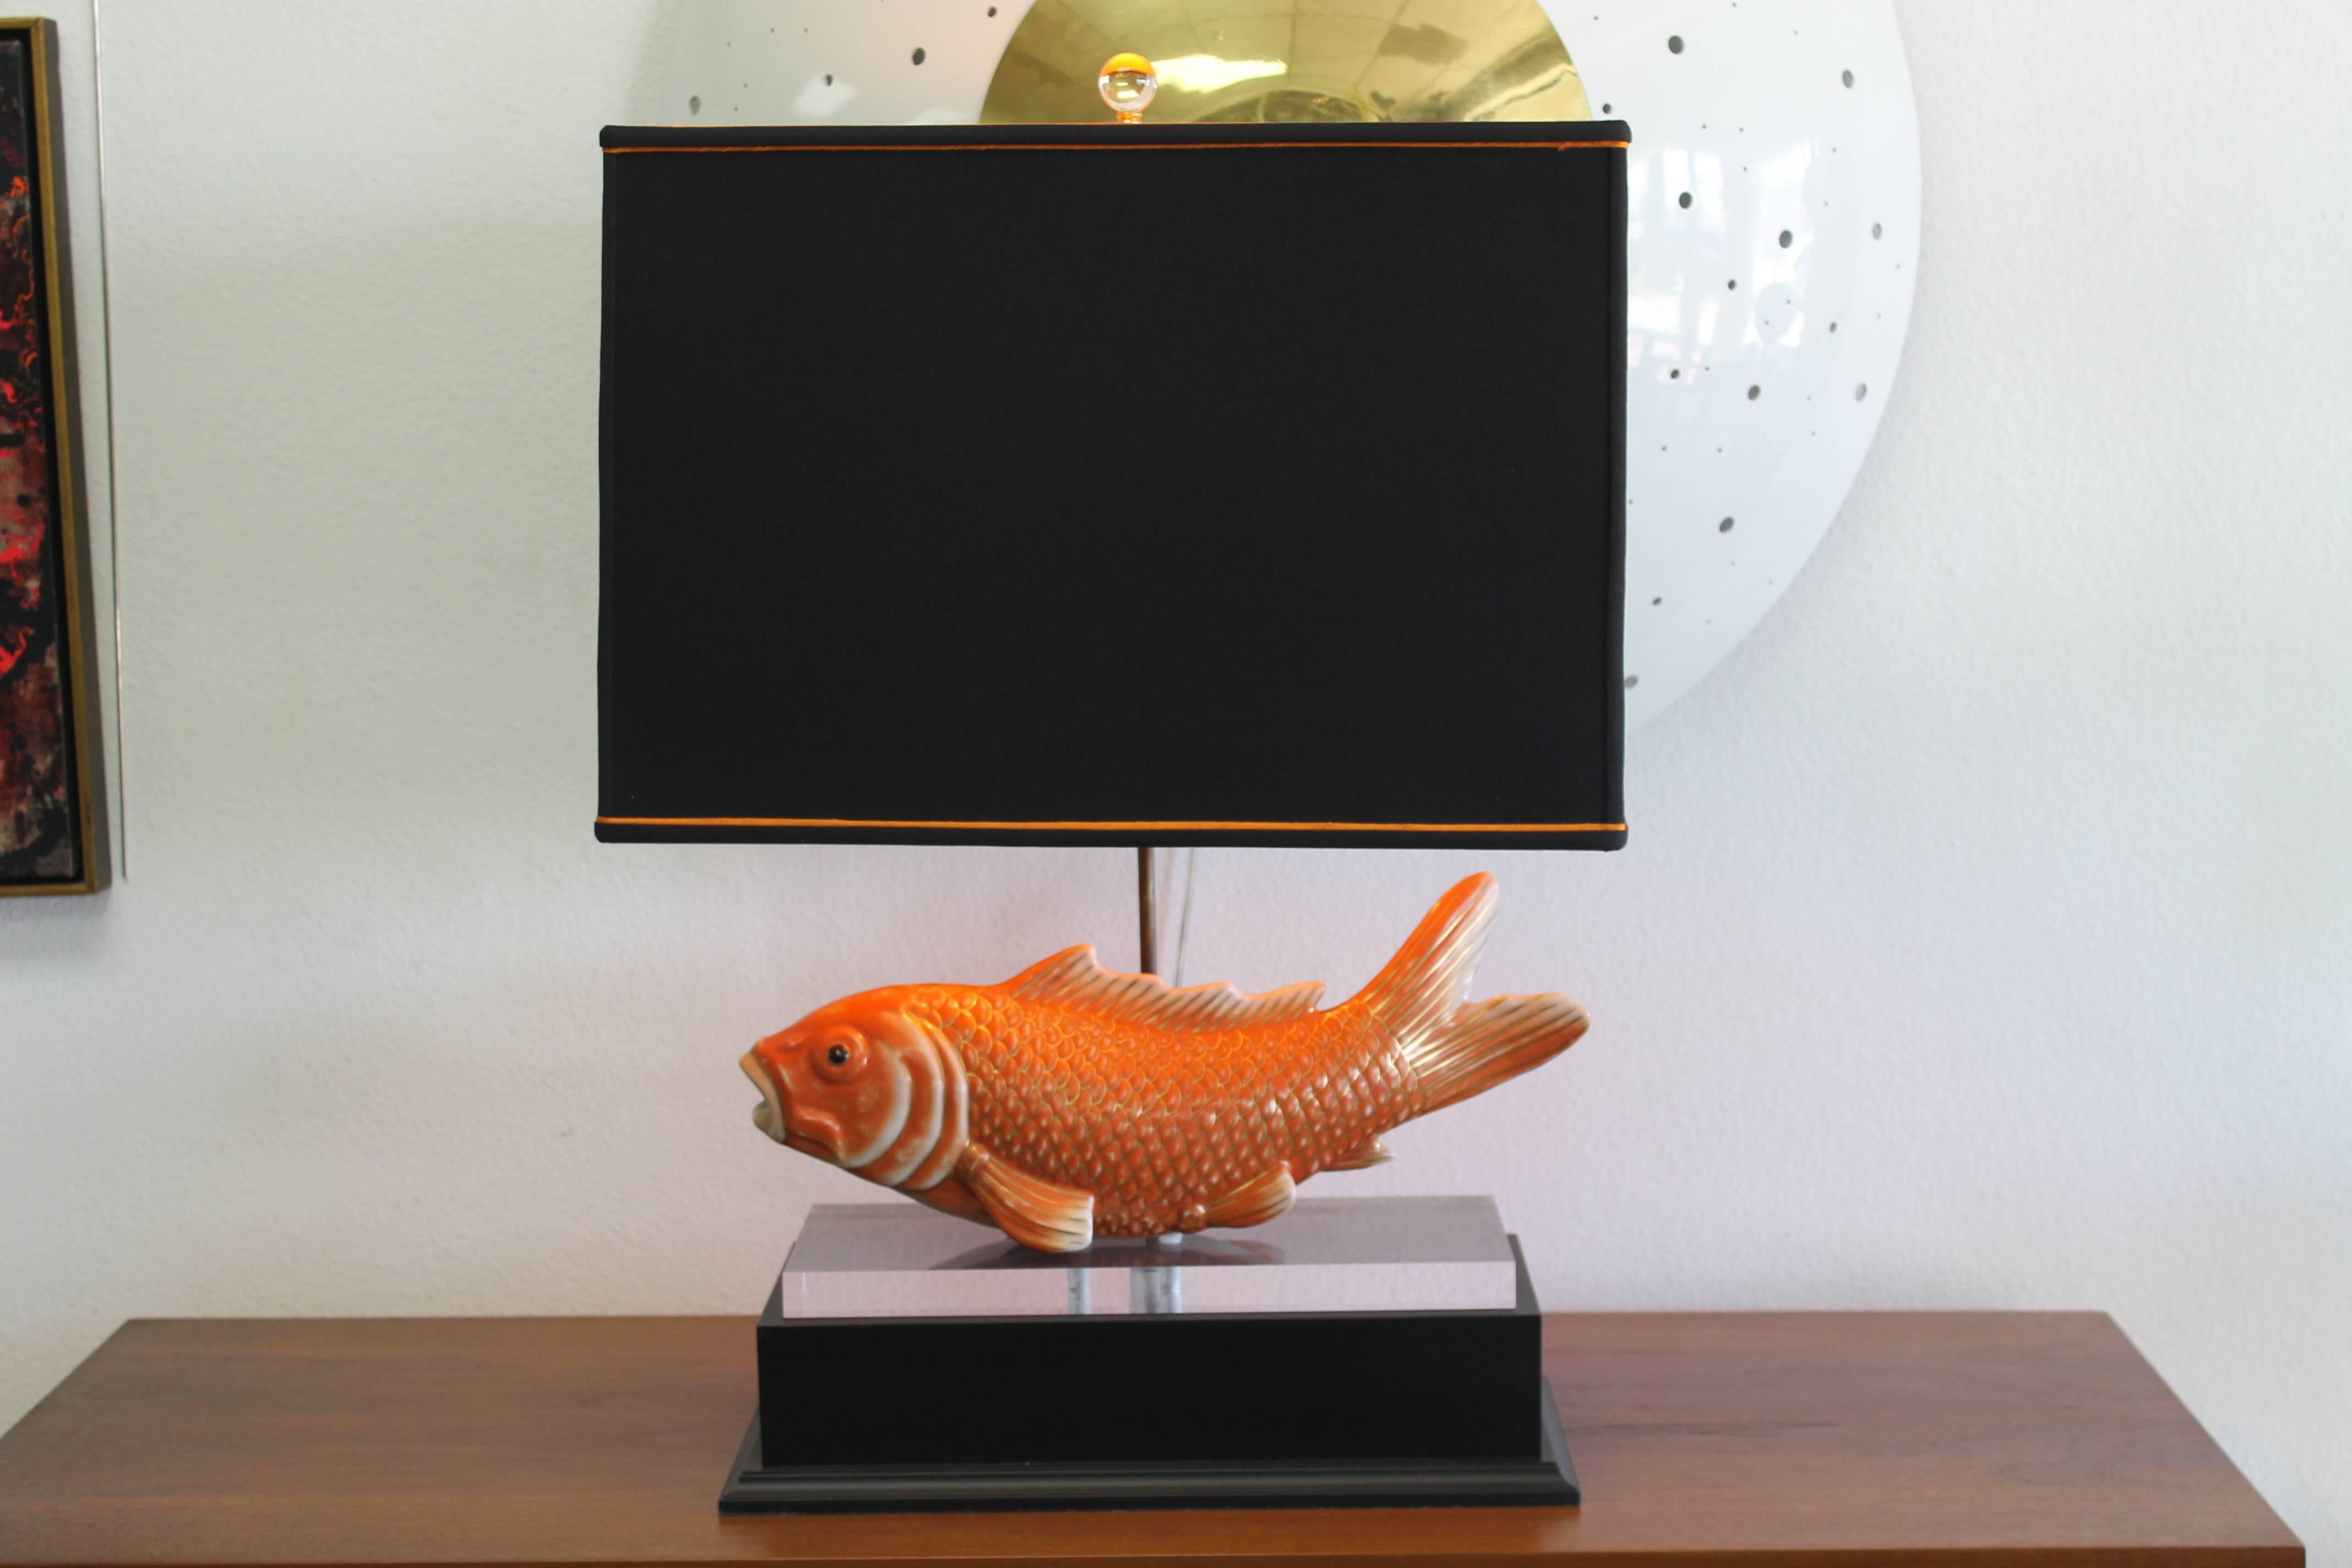 Pair of beautiful custom designed koi lamps with black and orange lamp shades. The black base is 17.5